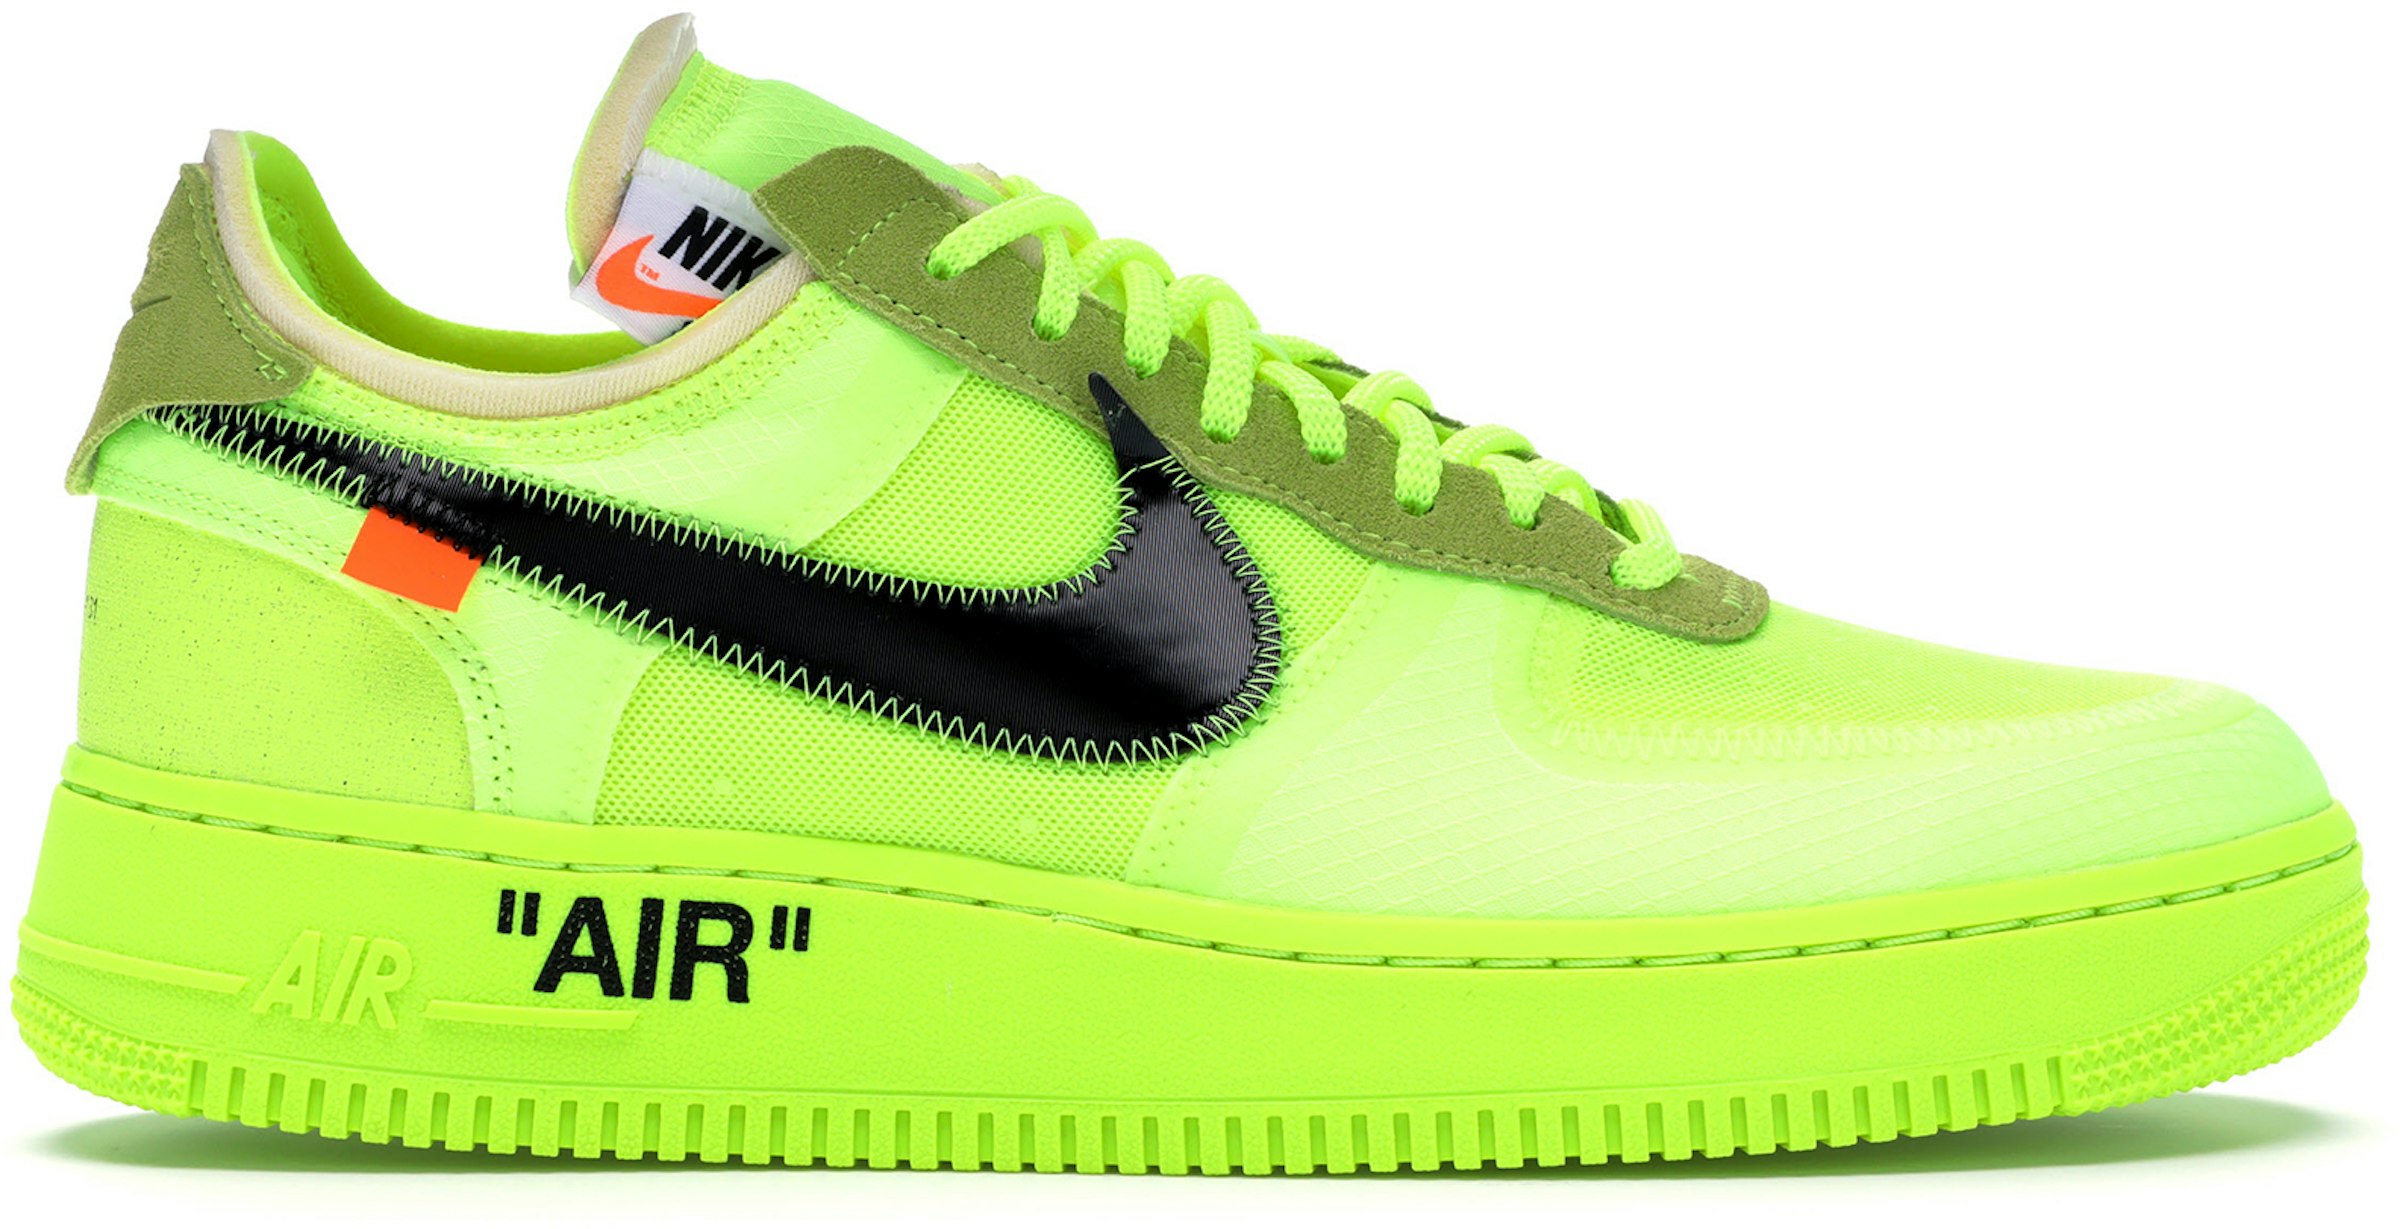 Nike Air Force Low Volt - AO4606-700 - US